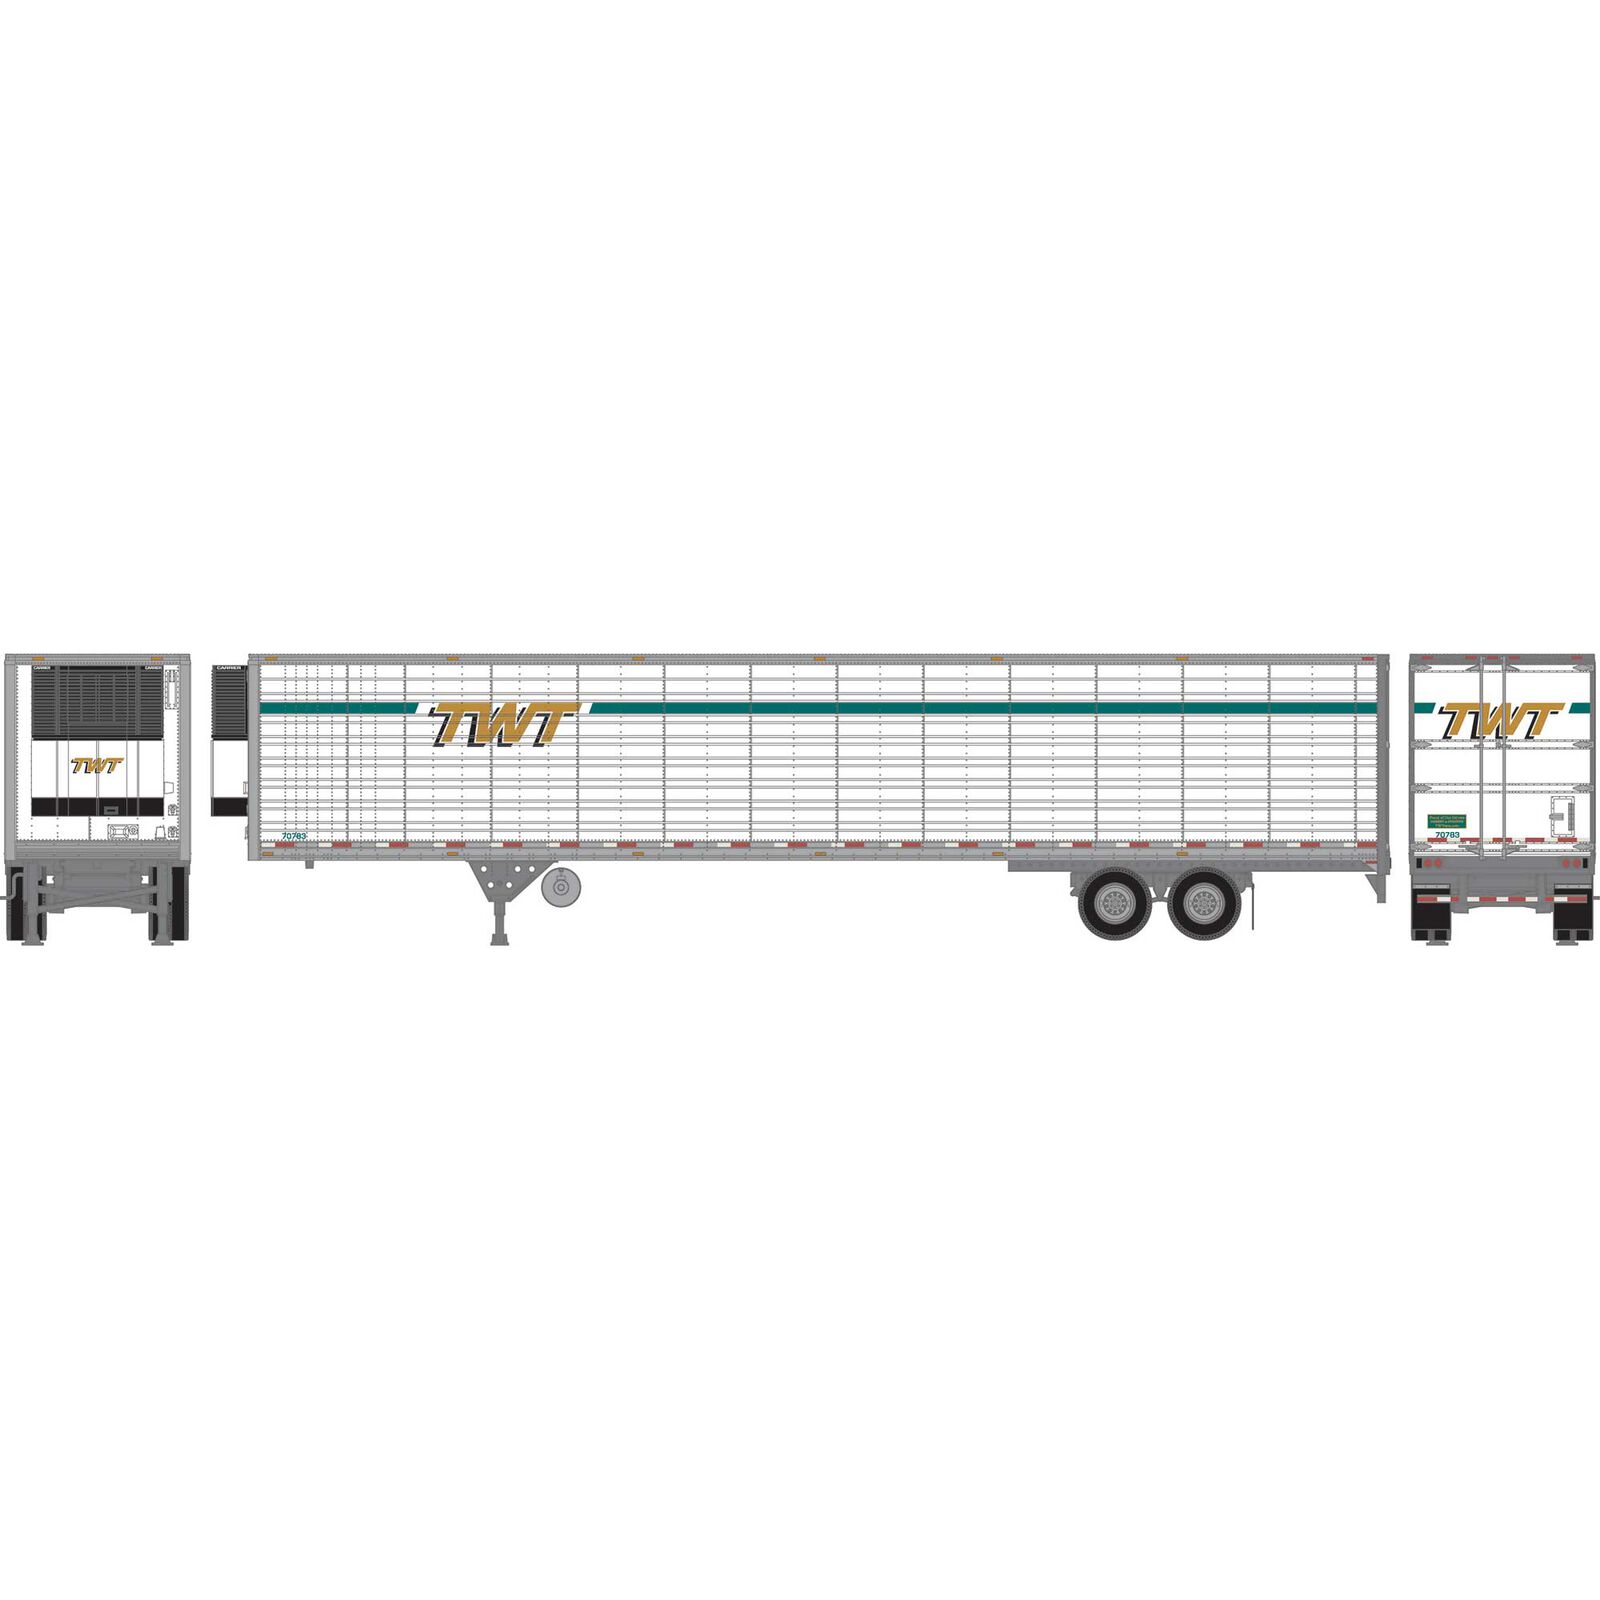 HO 53' Reefer Trailer, TWT Refrigerated #70783